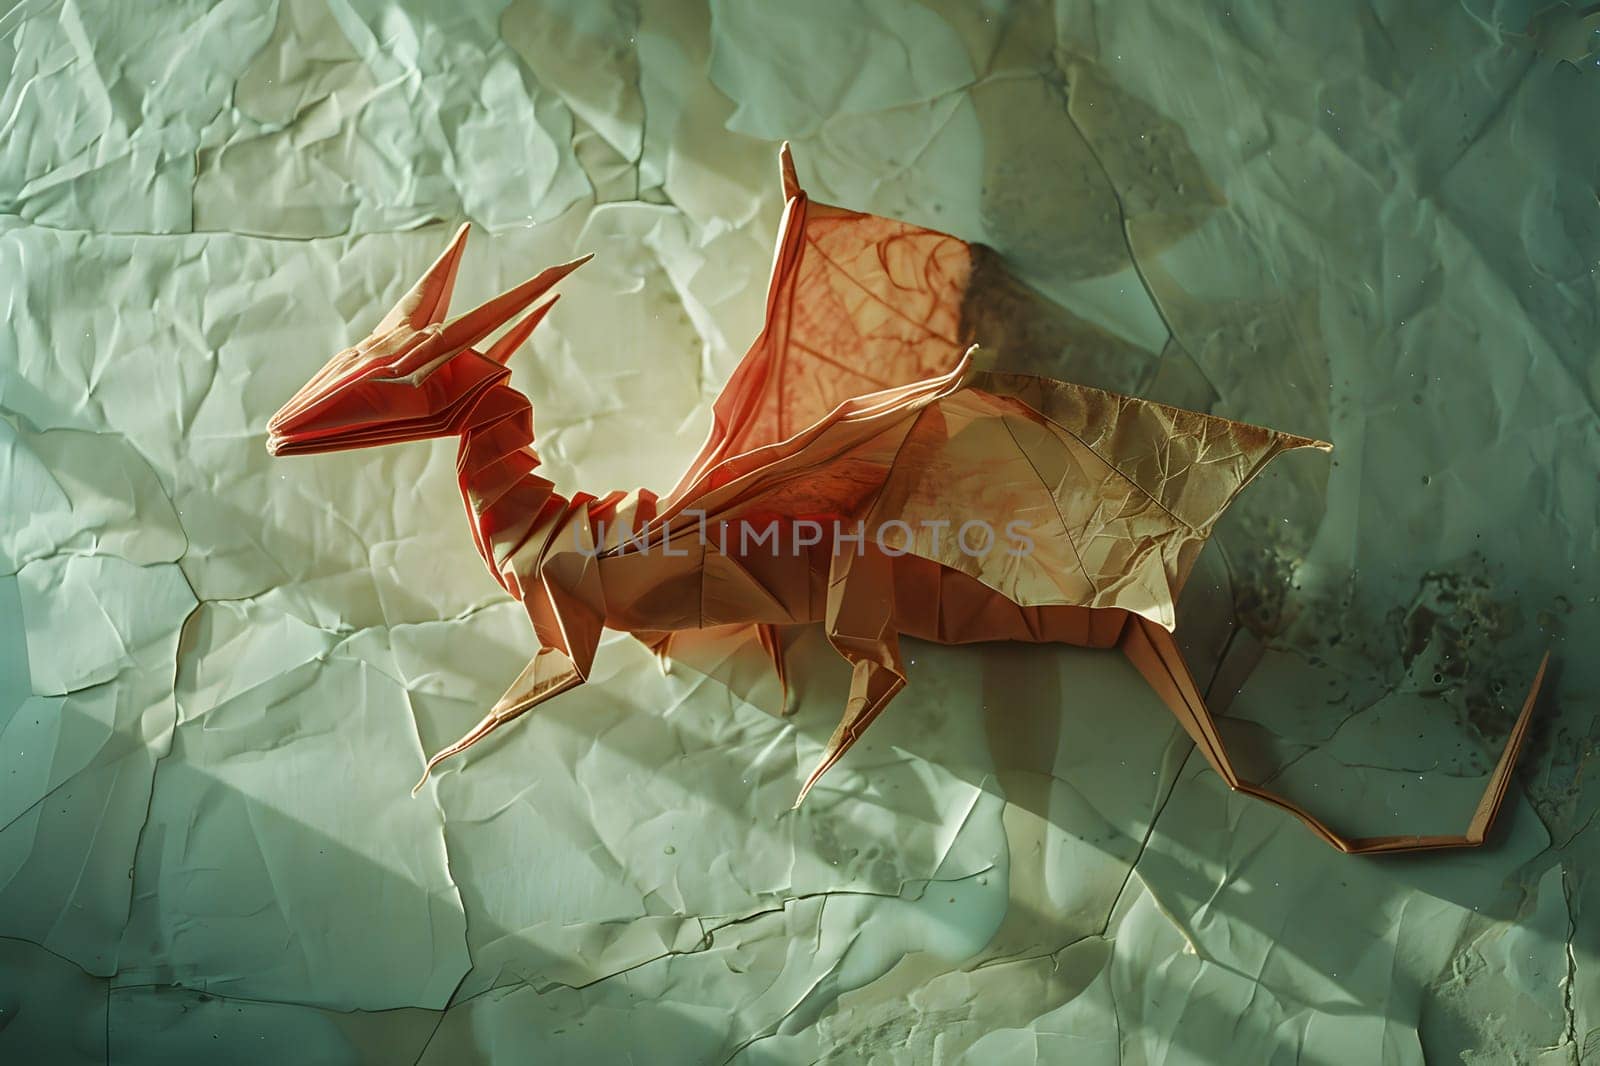 An arthropodinspired origami dragon perches on a crumpled origami paper, showcasing the fusion of creative arts and crafting skills at a unique event